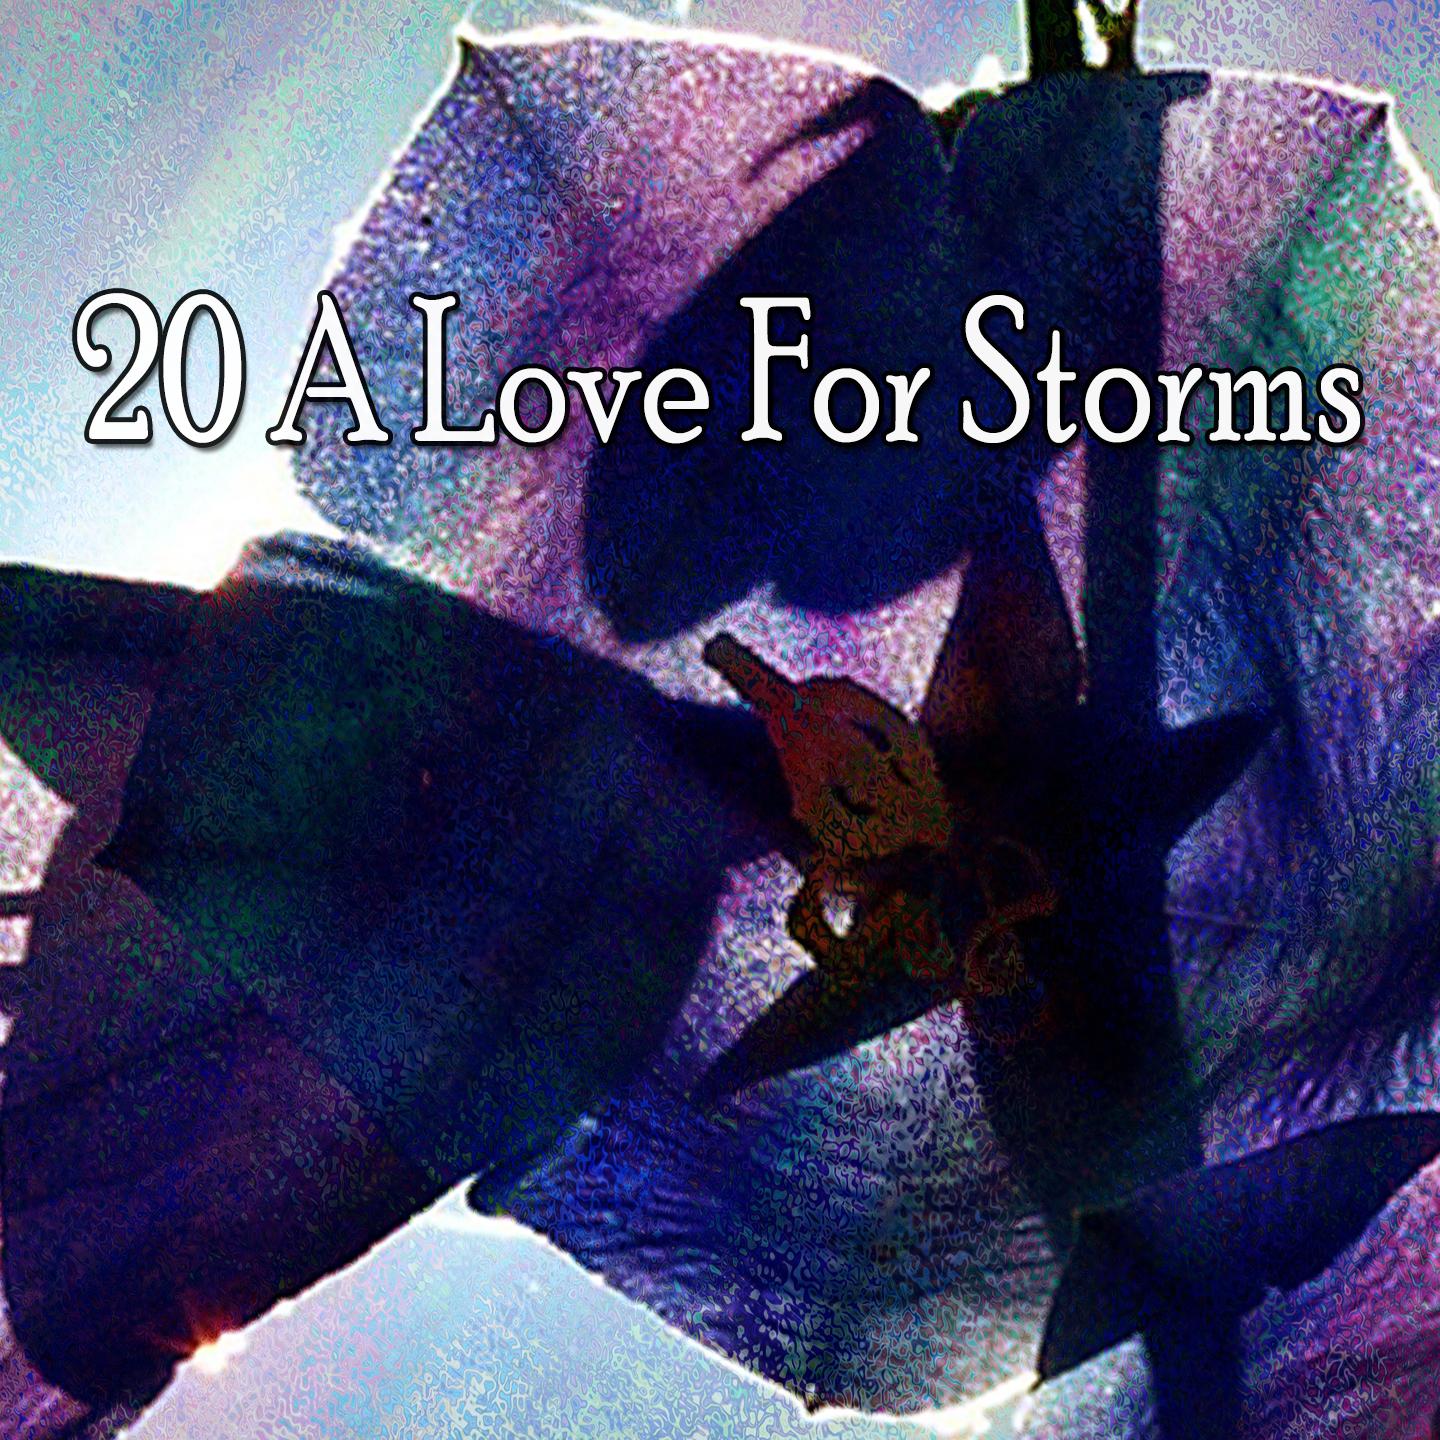 20 A Love for Storms